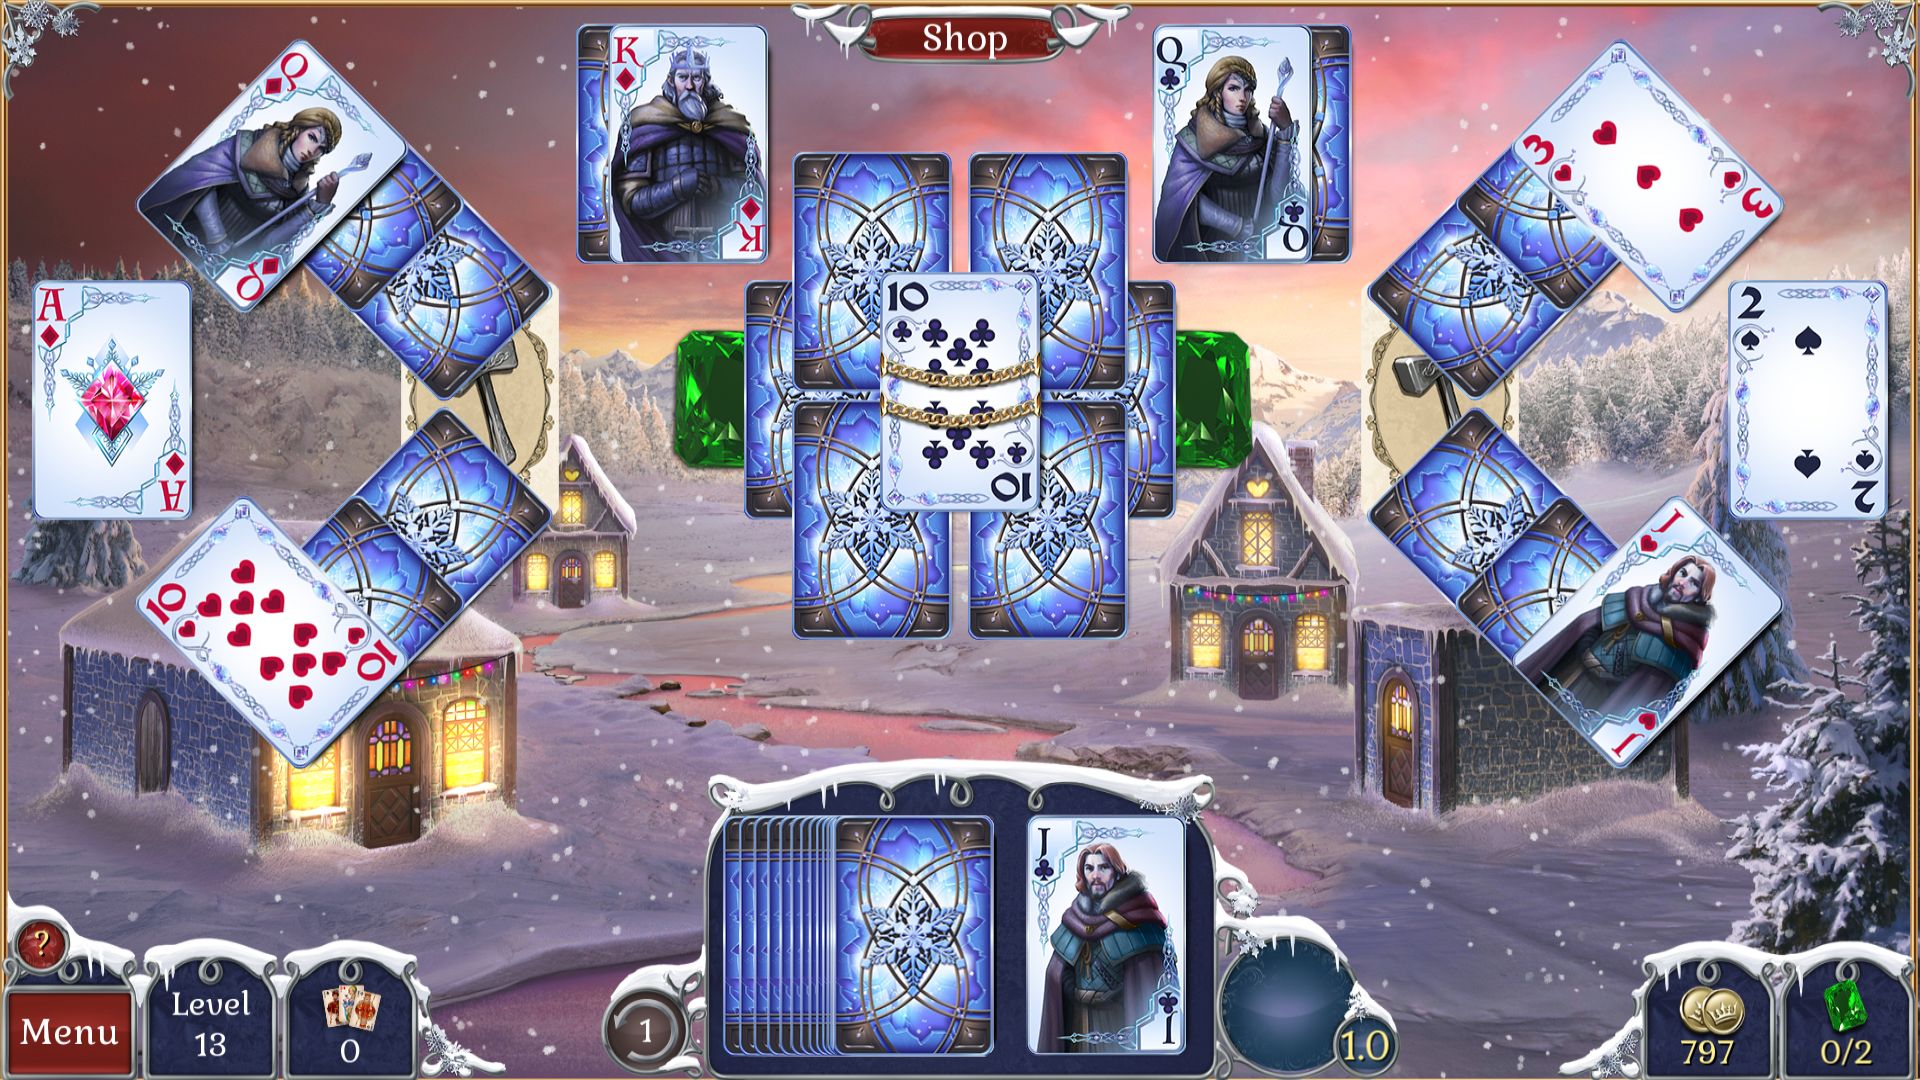 [$ 1.54] Jewel Match Solitaire Winterscapes Steam CD Key